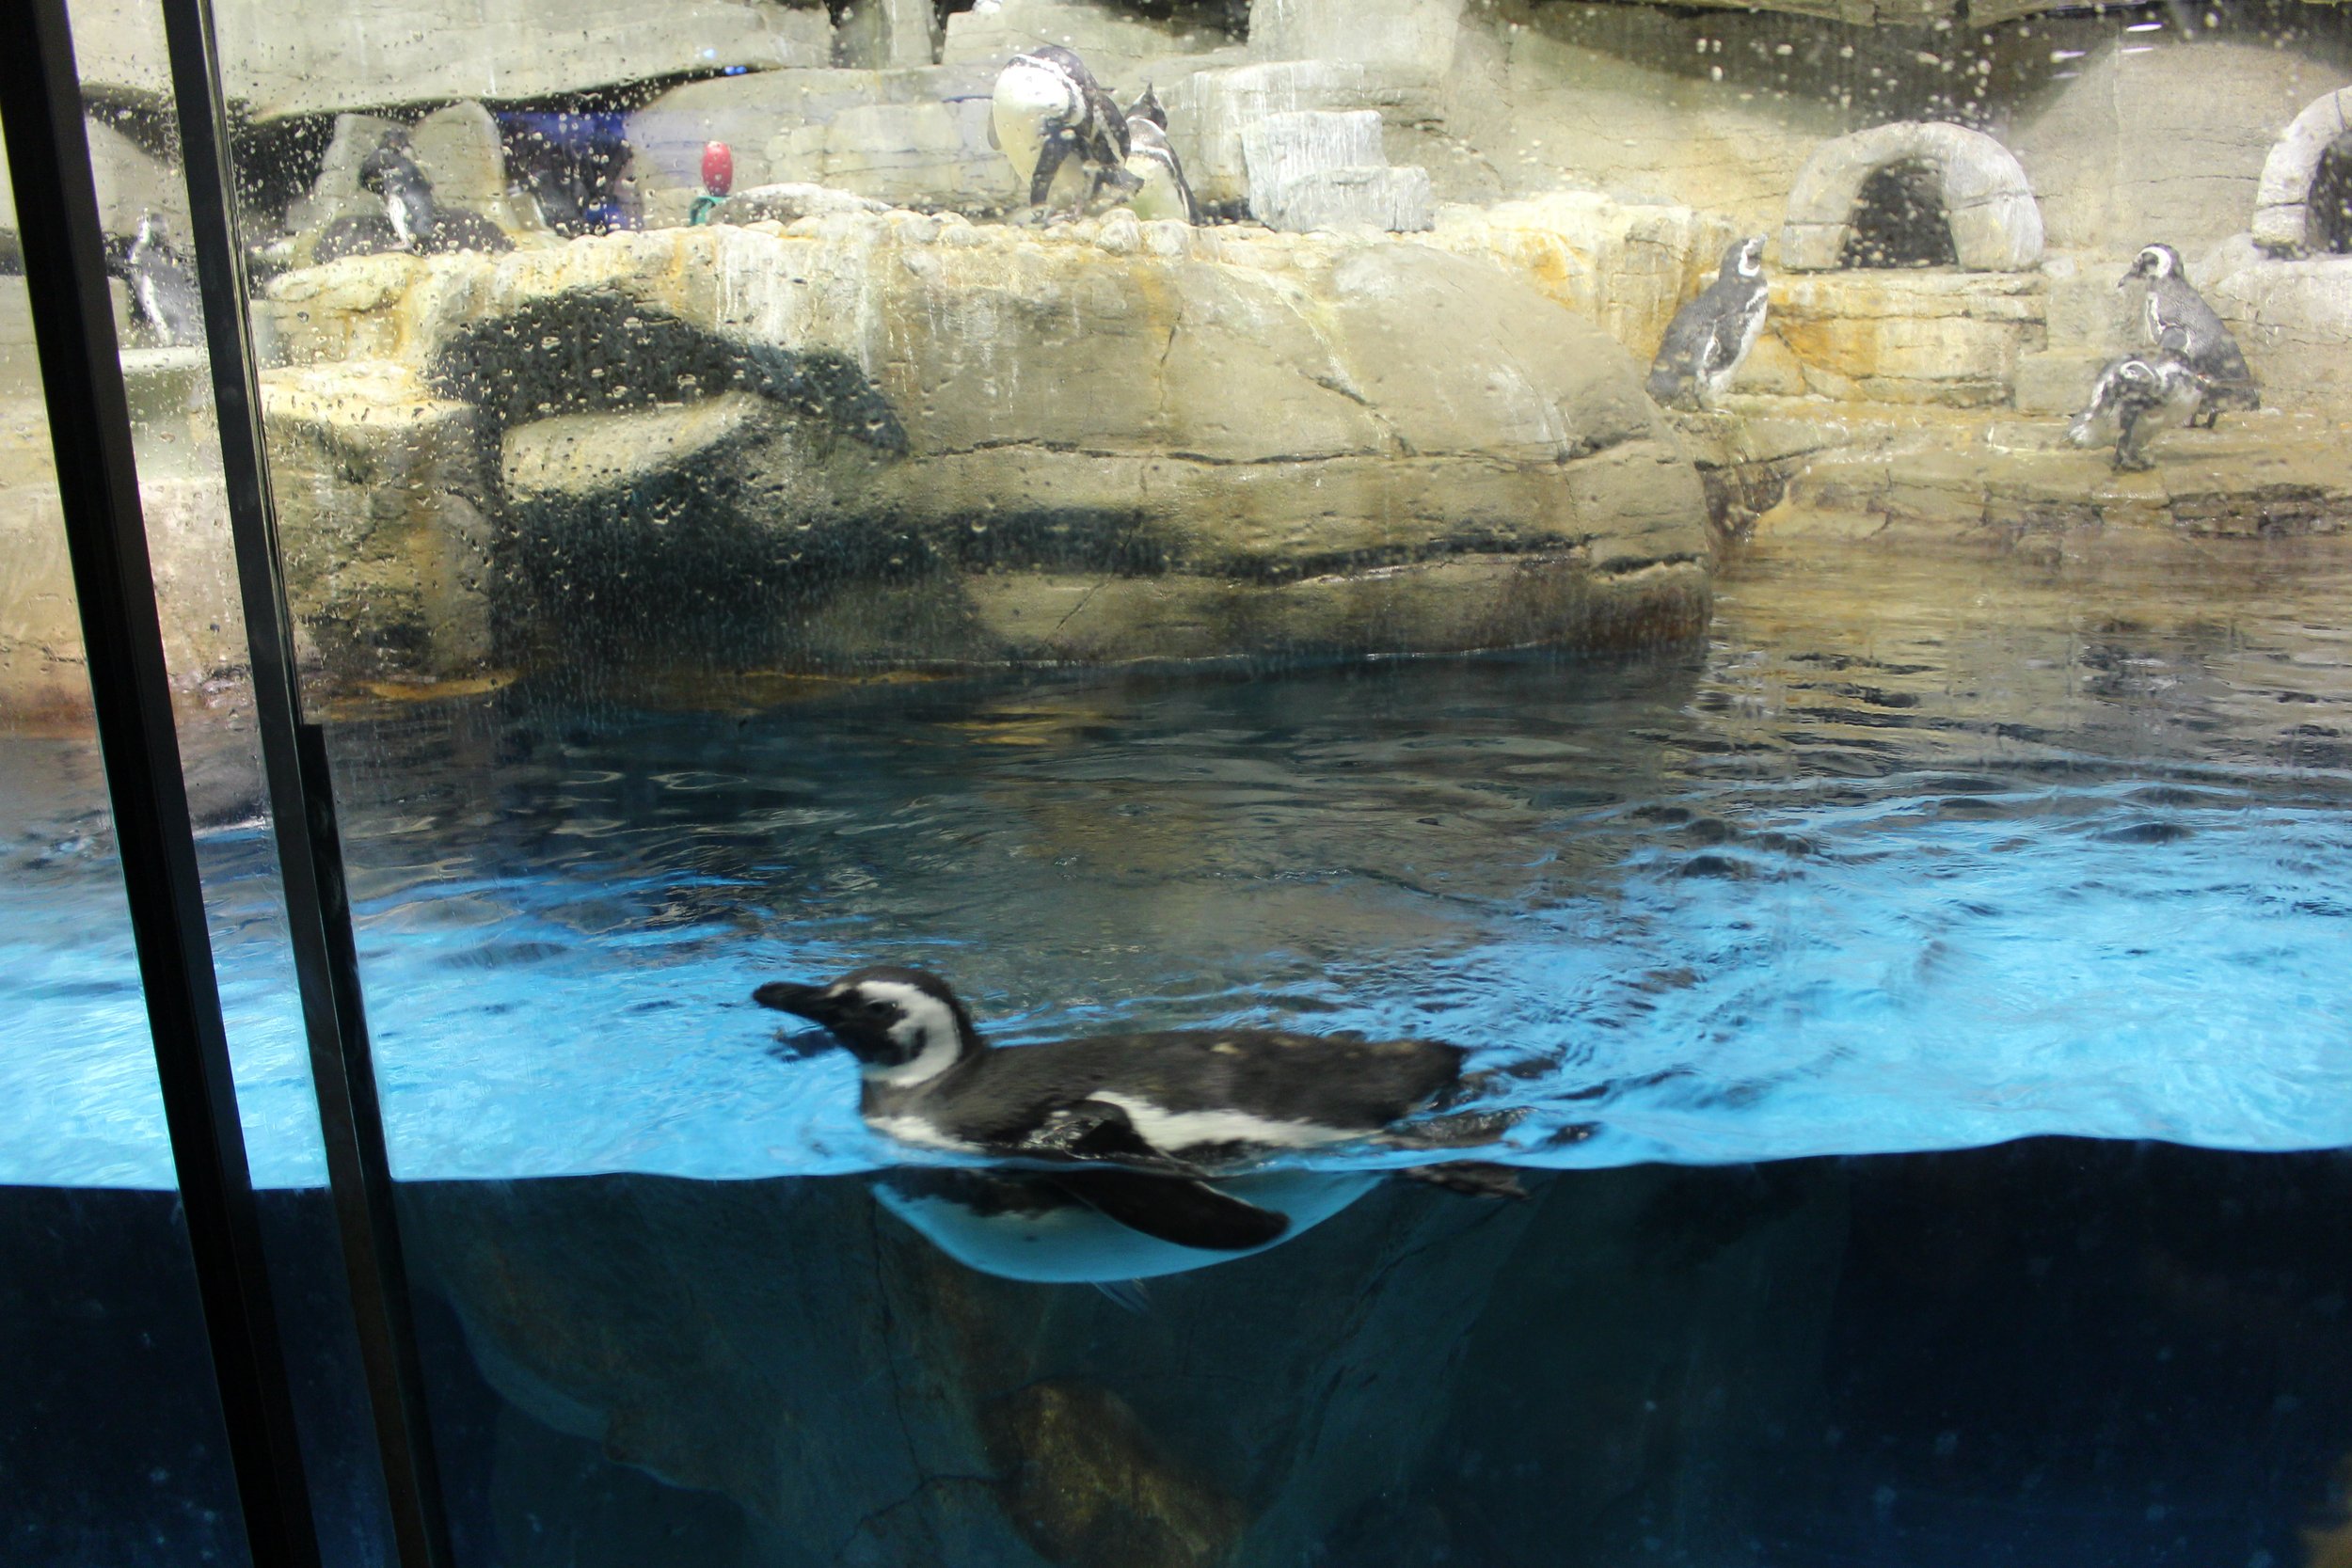  Penguin swimming in the water 